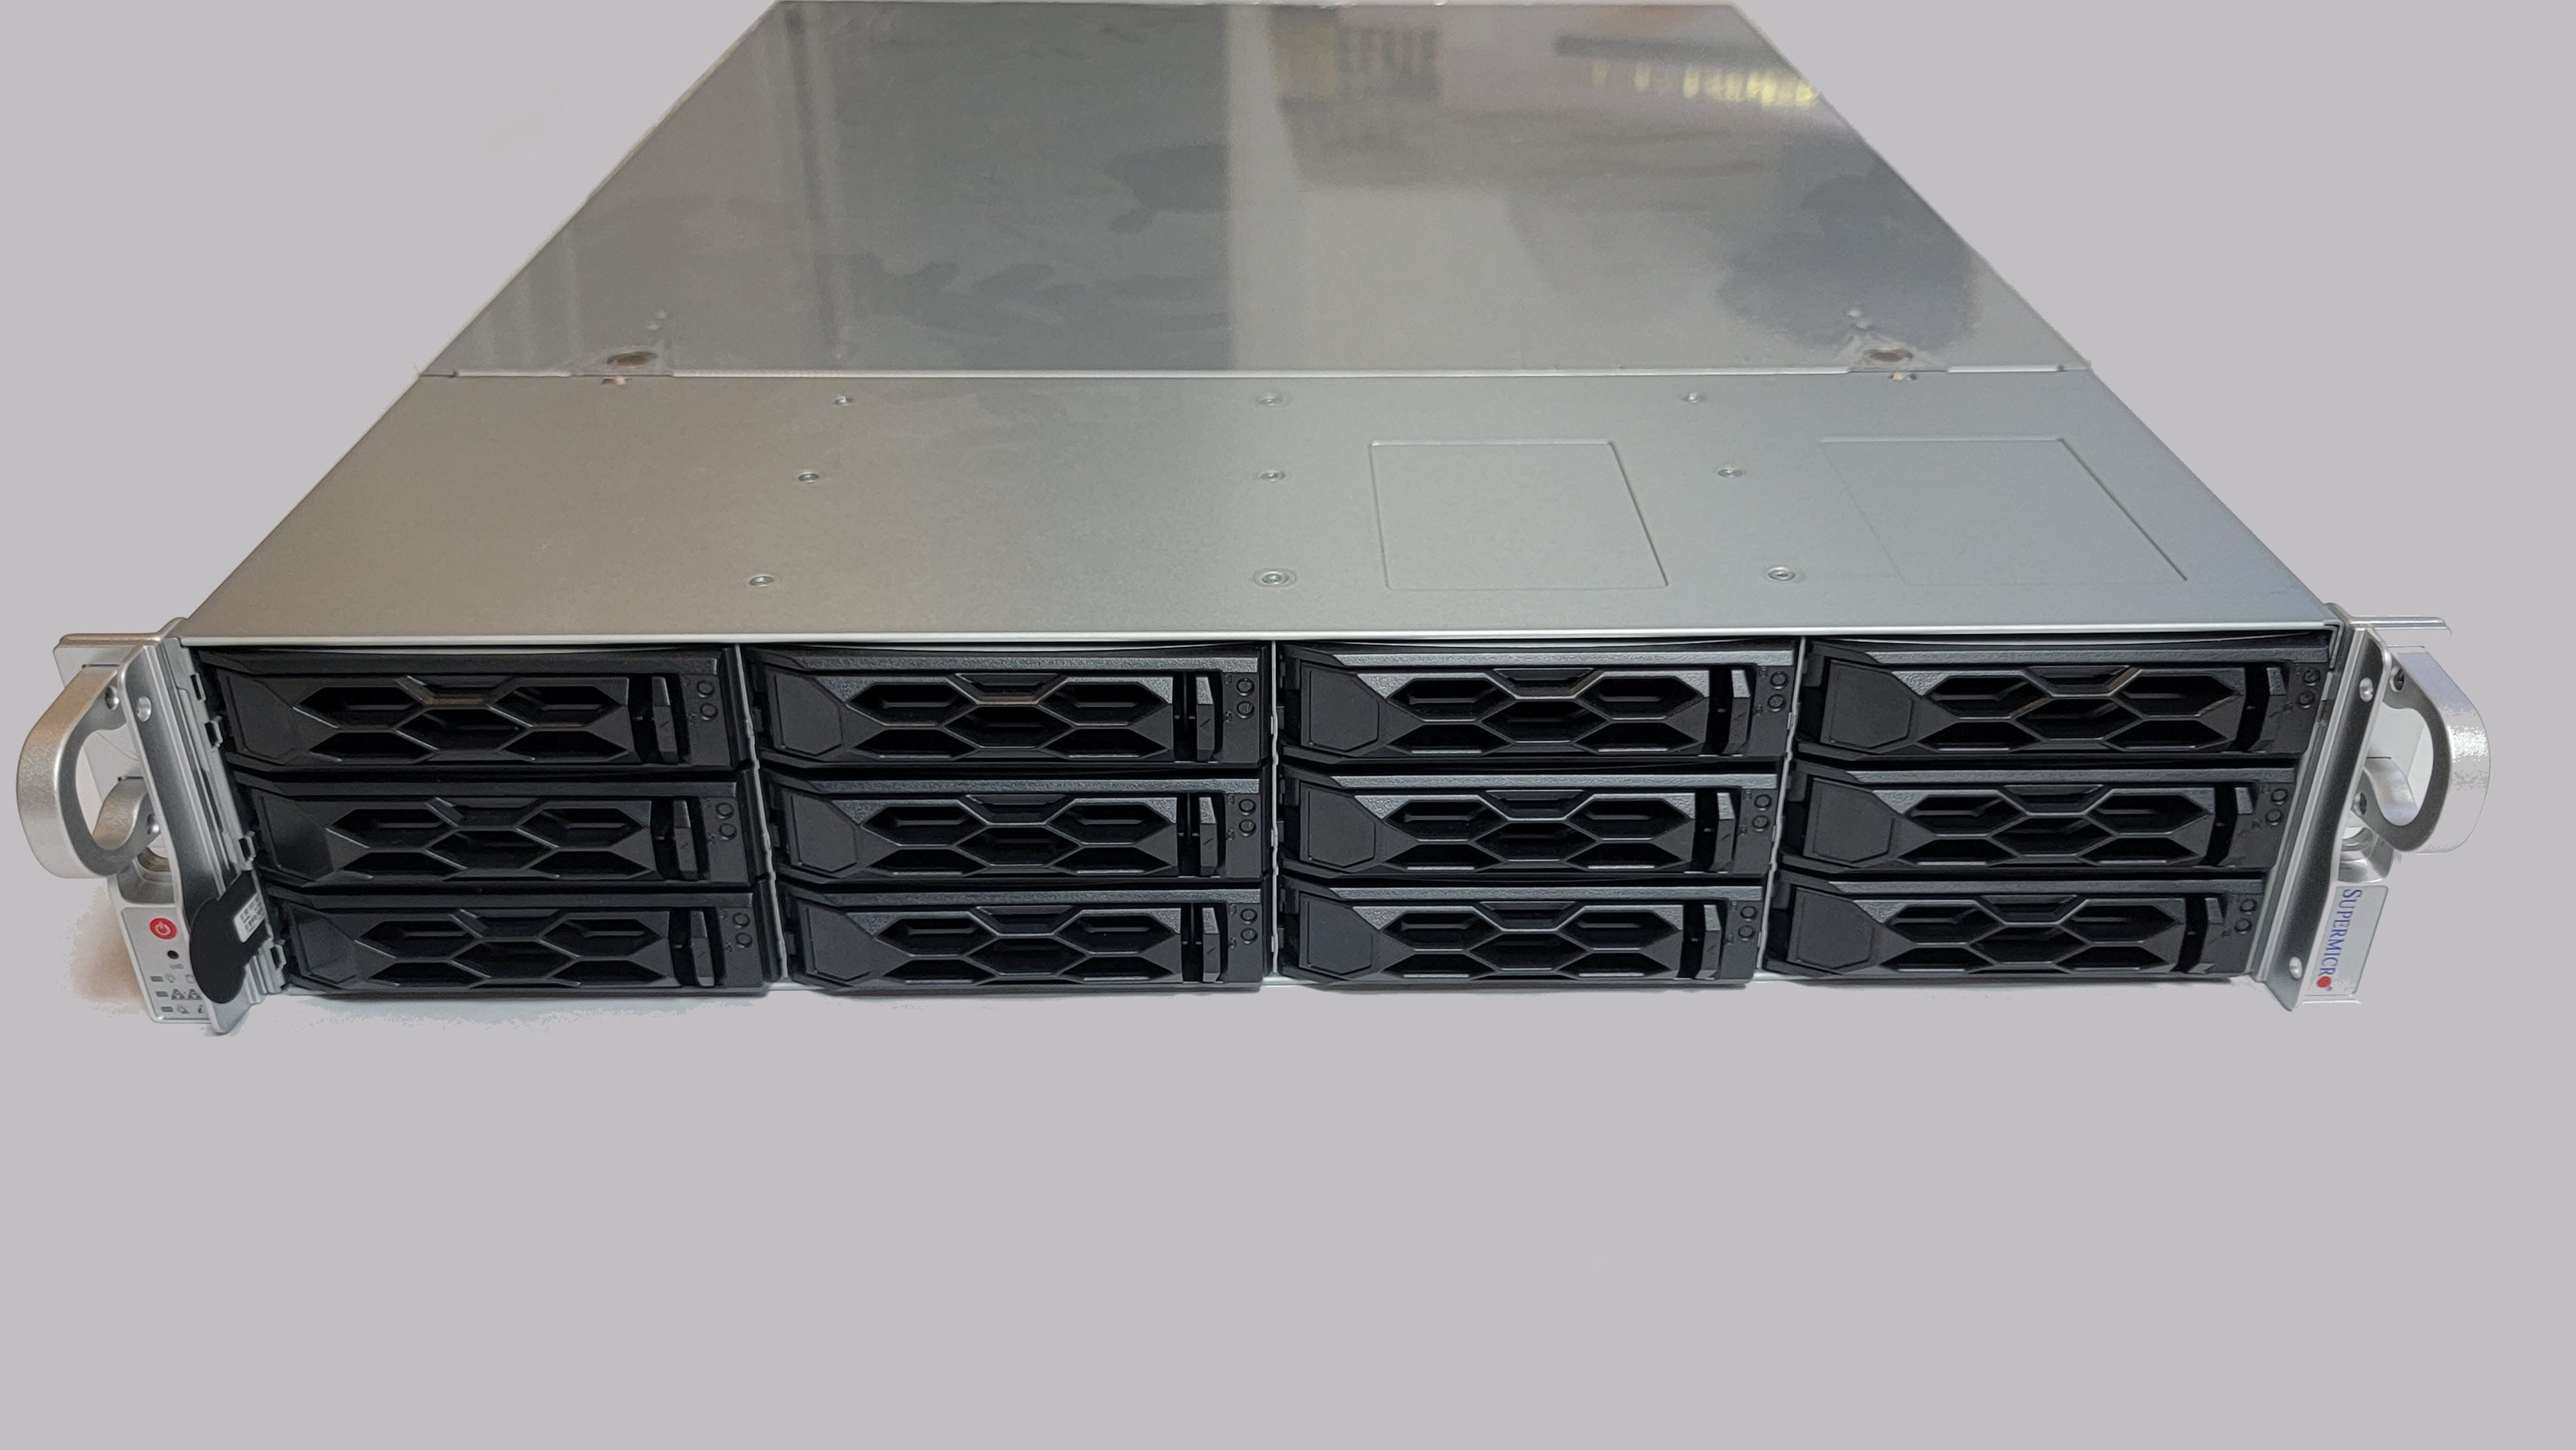 Supermicro SYS-621C-TN12R server, Test Systems and Setup - Intel